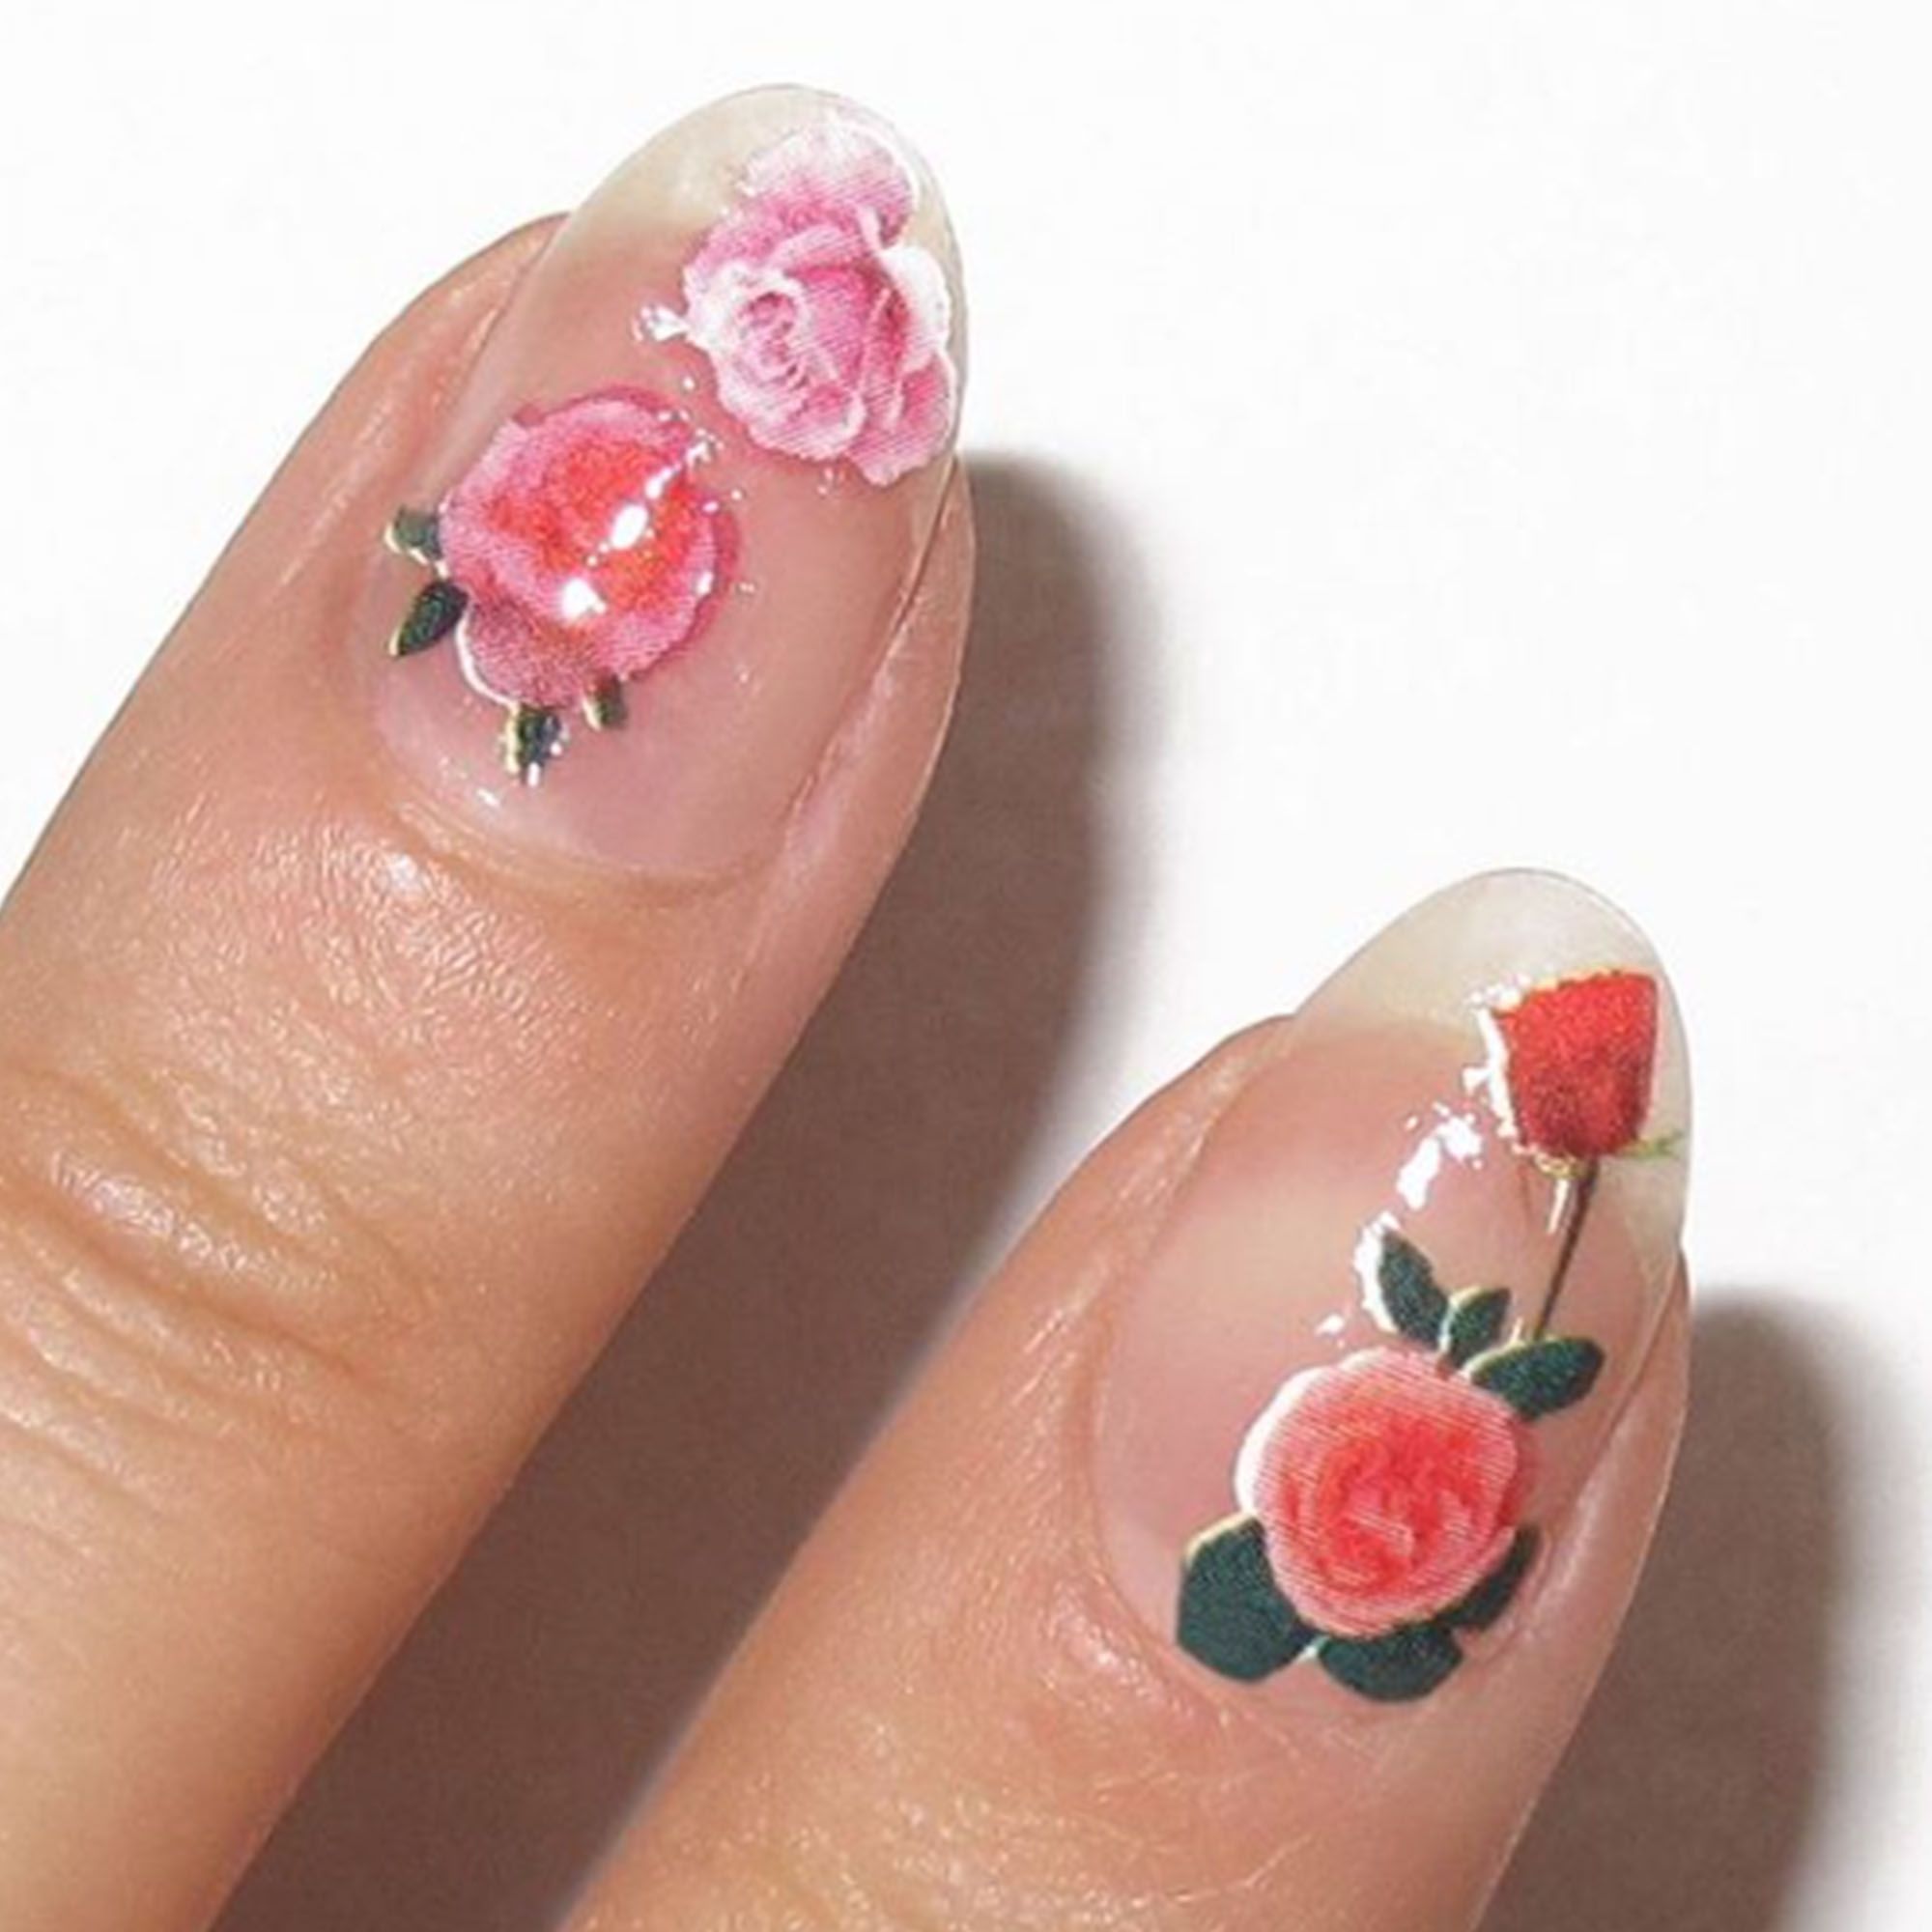 25 Long Acrylic Nail Designs With Butterfly and Flower Must Inspire You |  Spring acrylic nails, Floral nails, Long acrylic nail designs